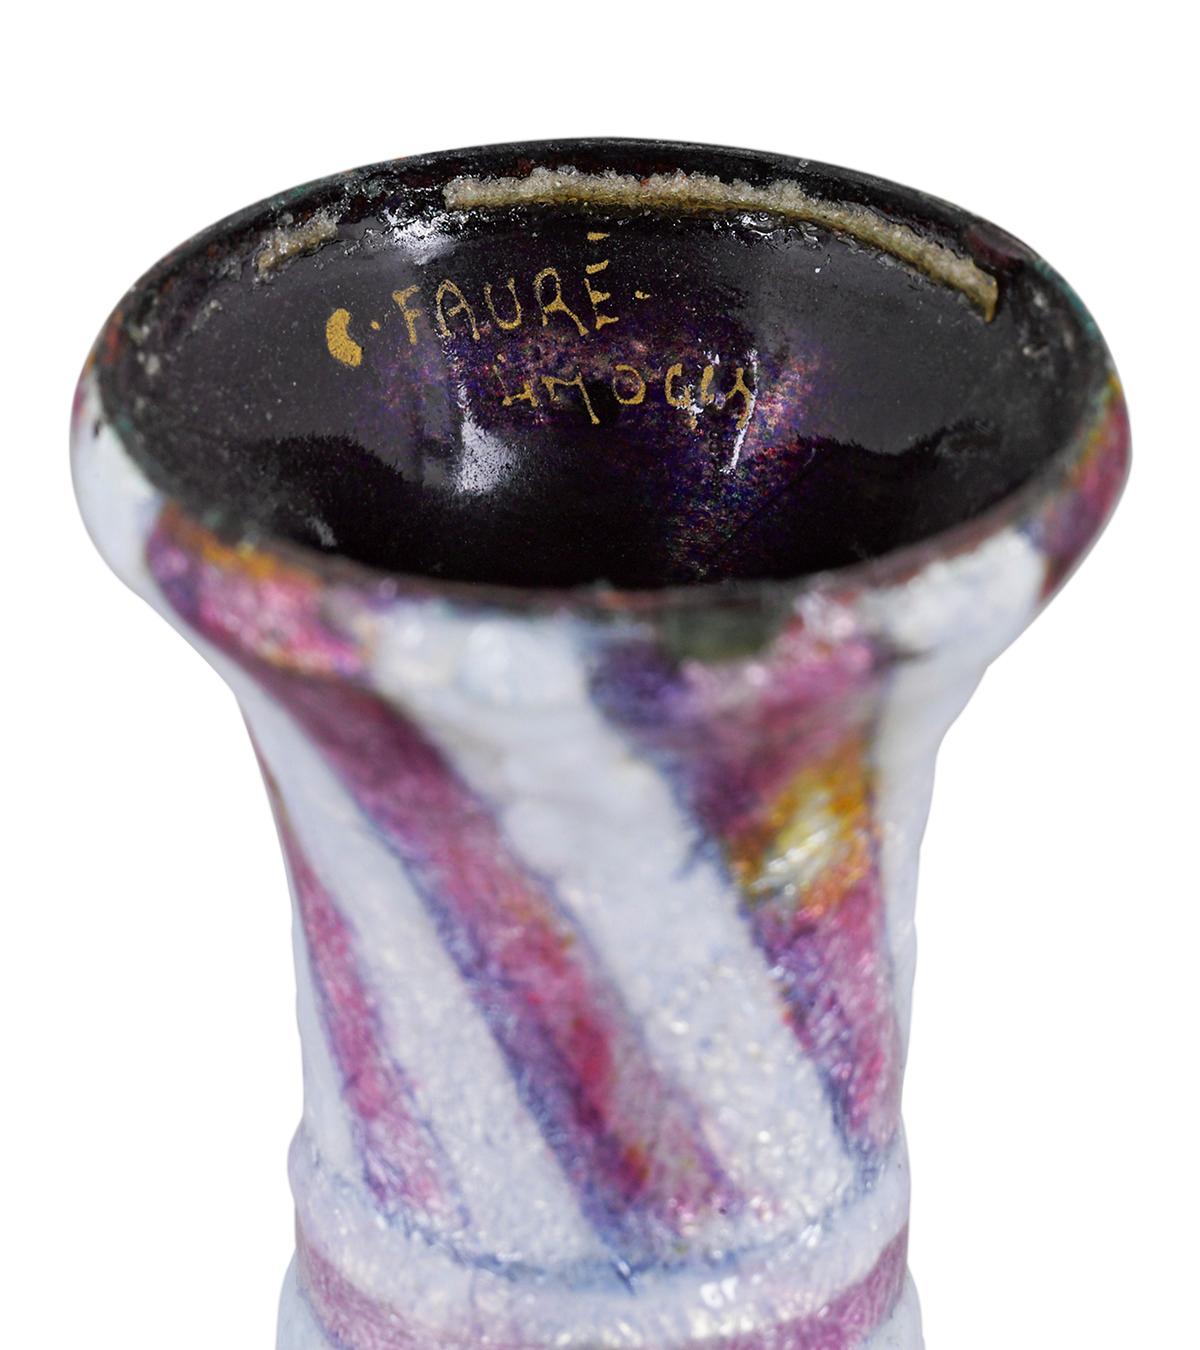 This exceptional Art Deco-period vase was crafted by the master of enamelwork Camille Fauré. Based in the famed Limoges, France, Fauré made a name for himself after developing his distinctive technique of hand-painting colorful enamel over copper.